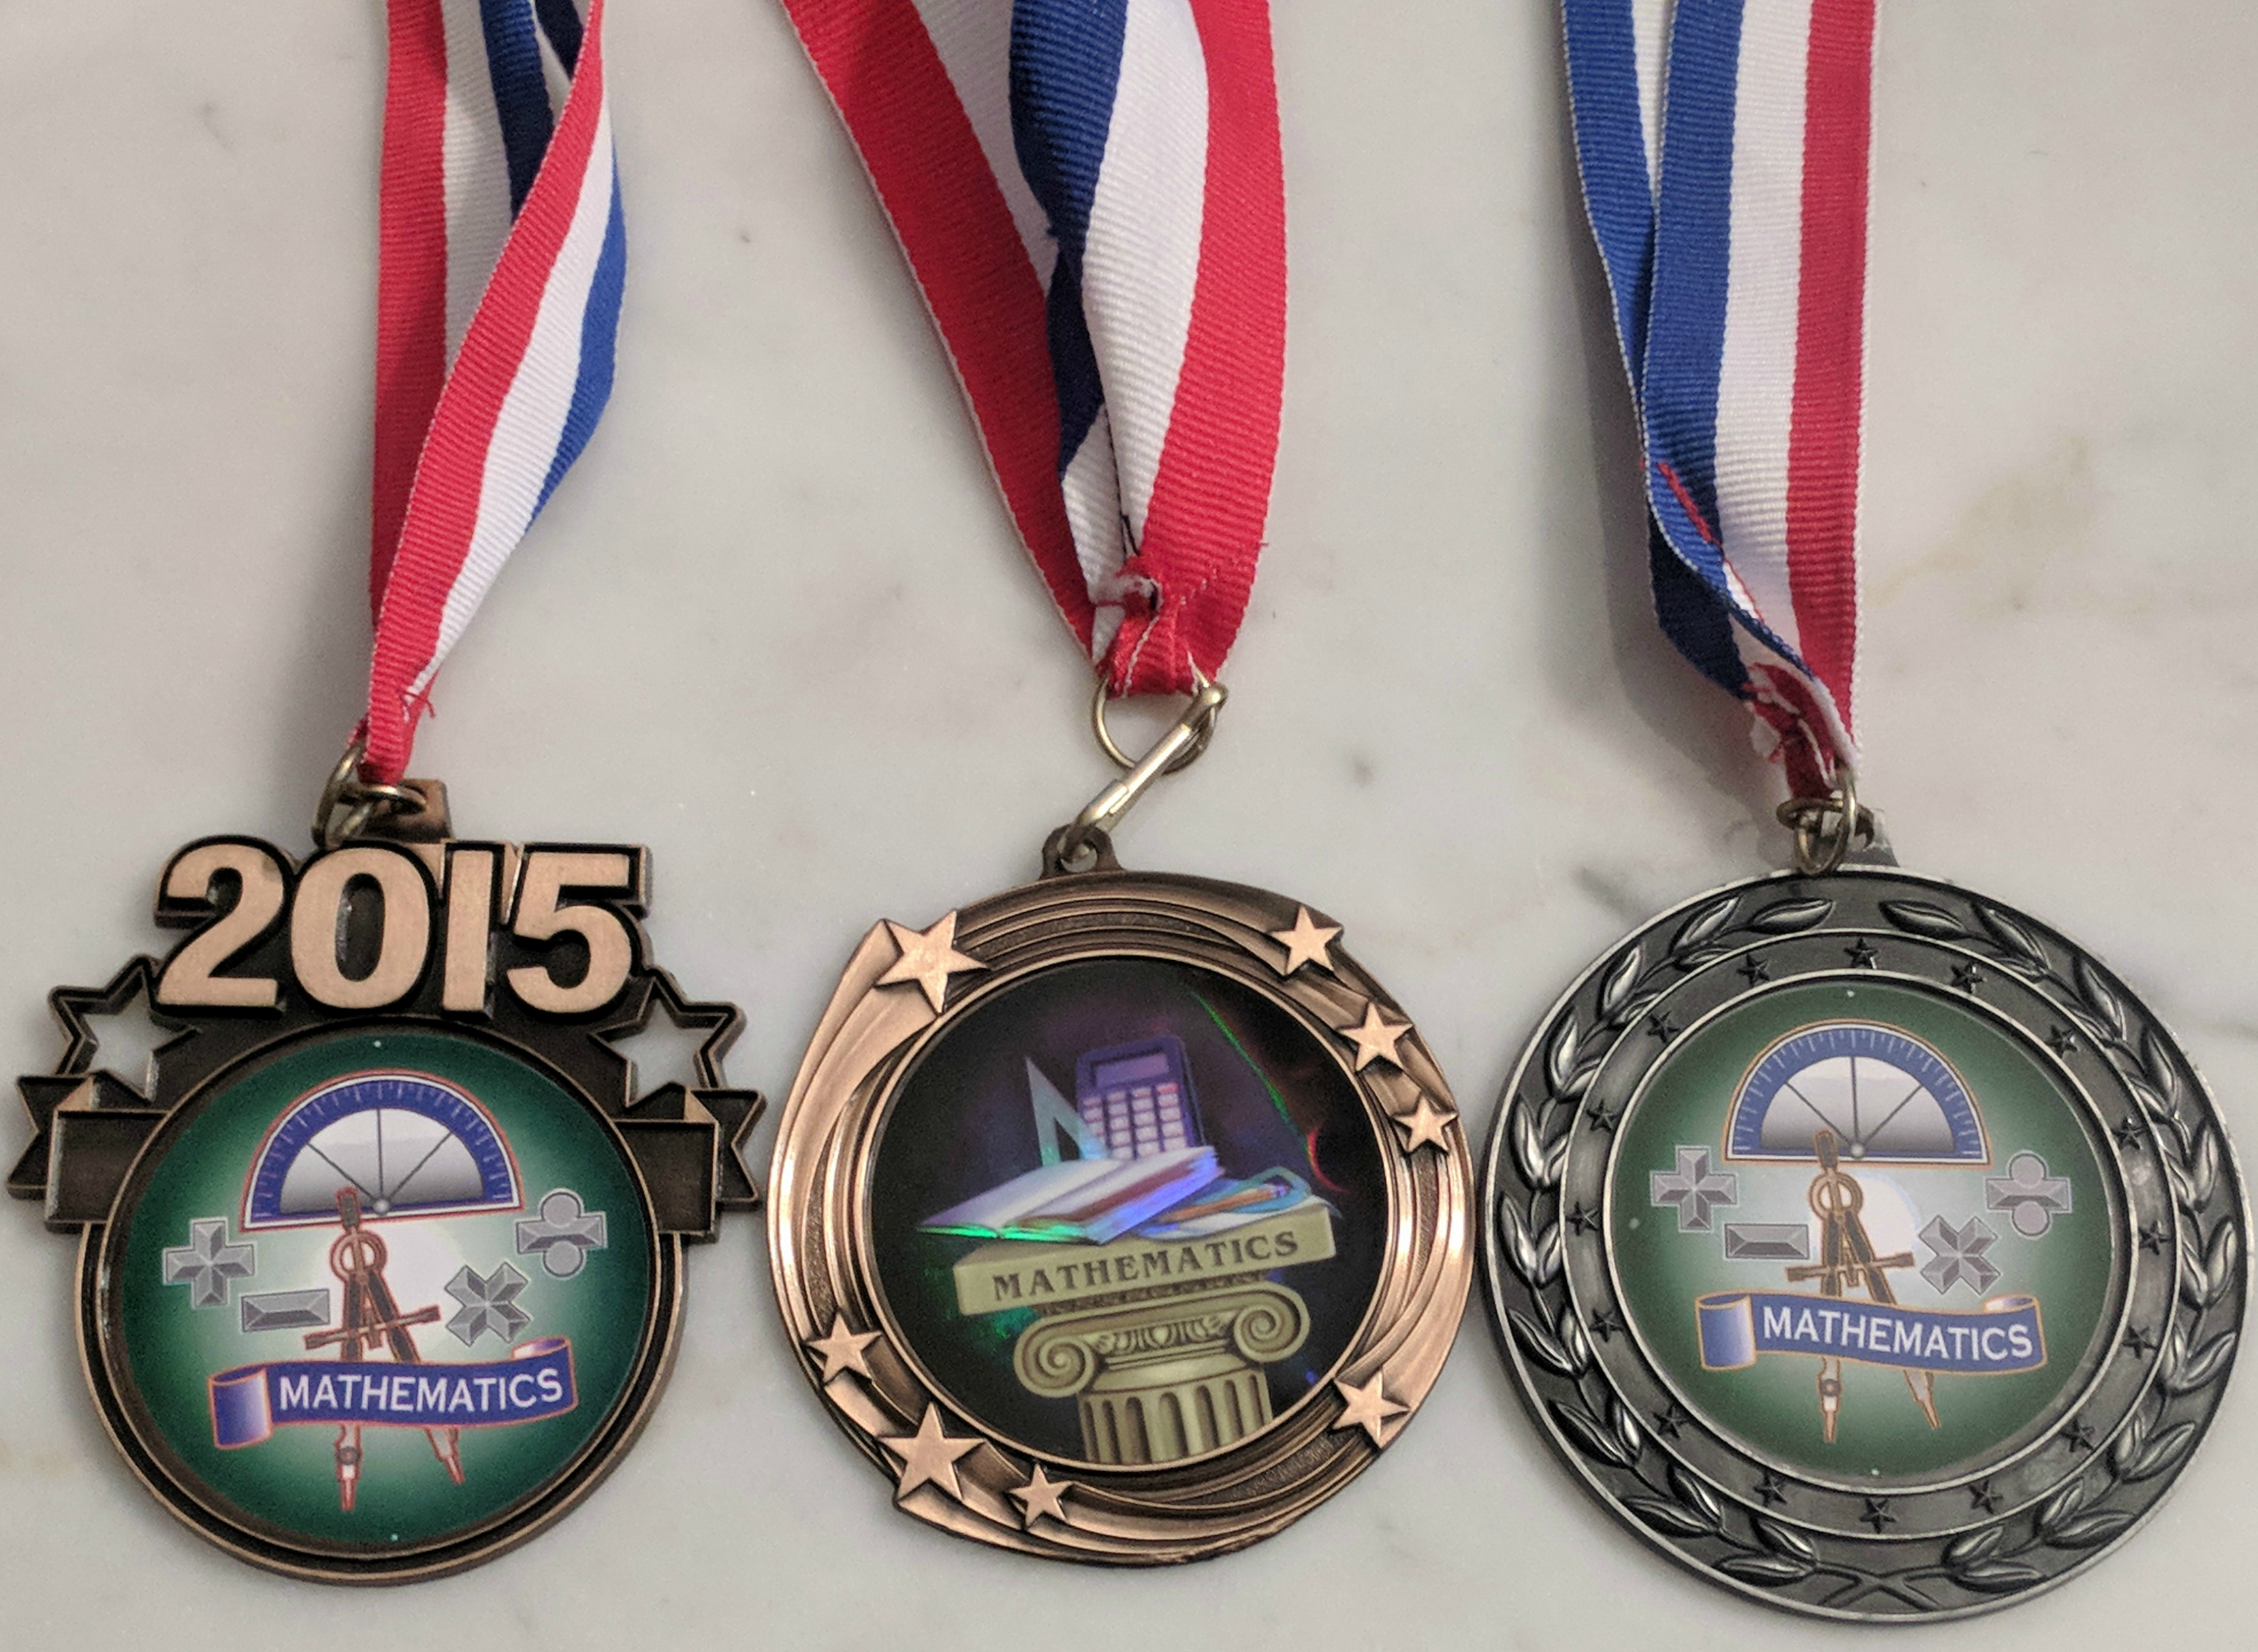 The fronts of my MoMath competition medals